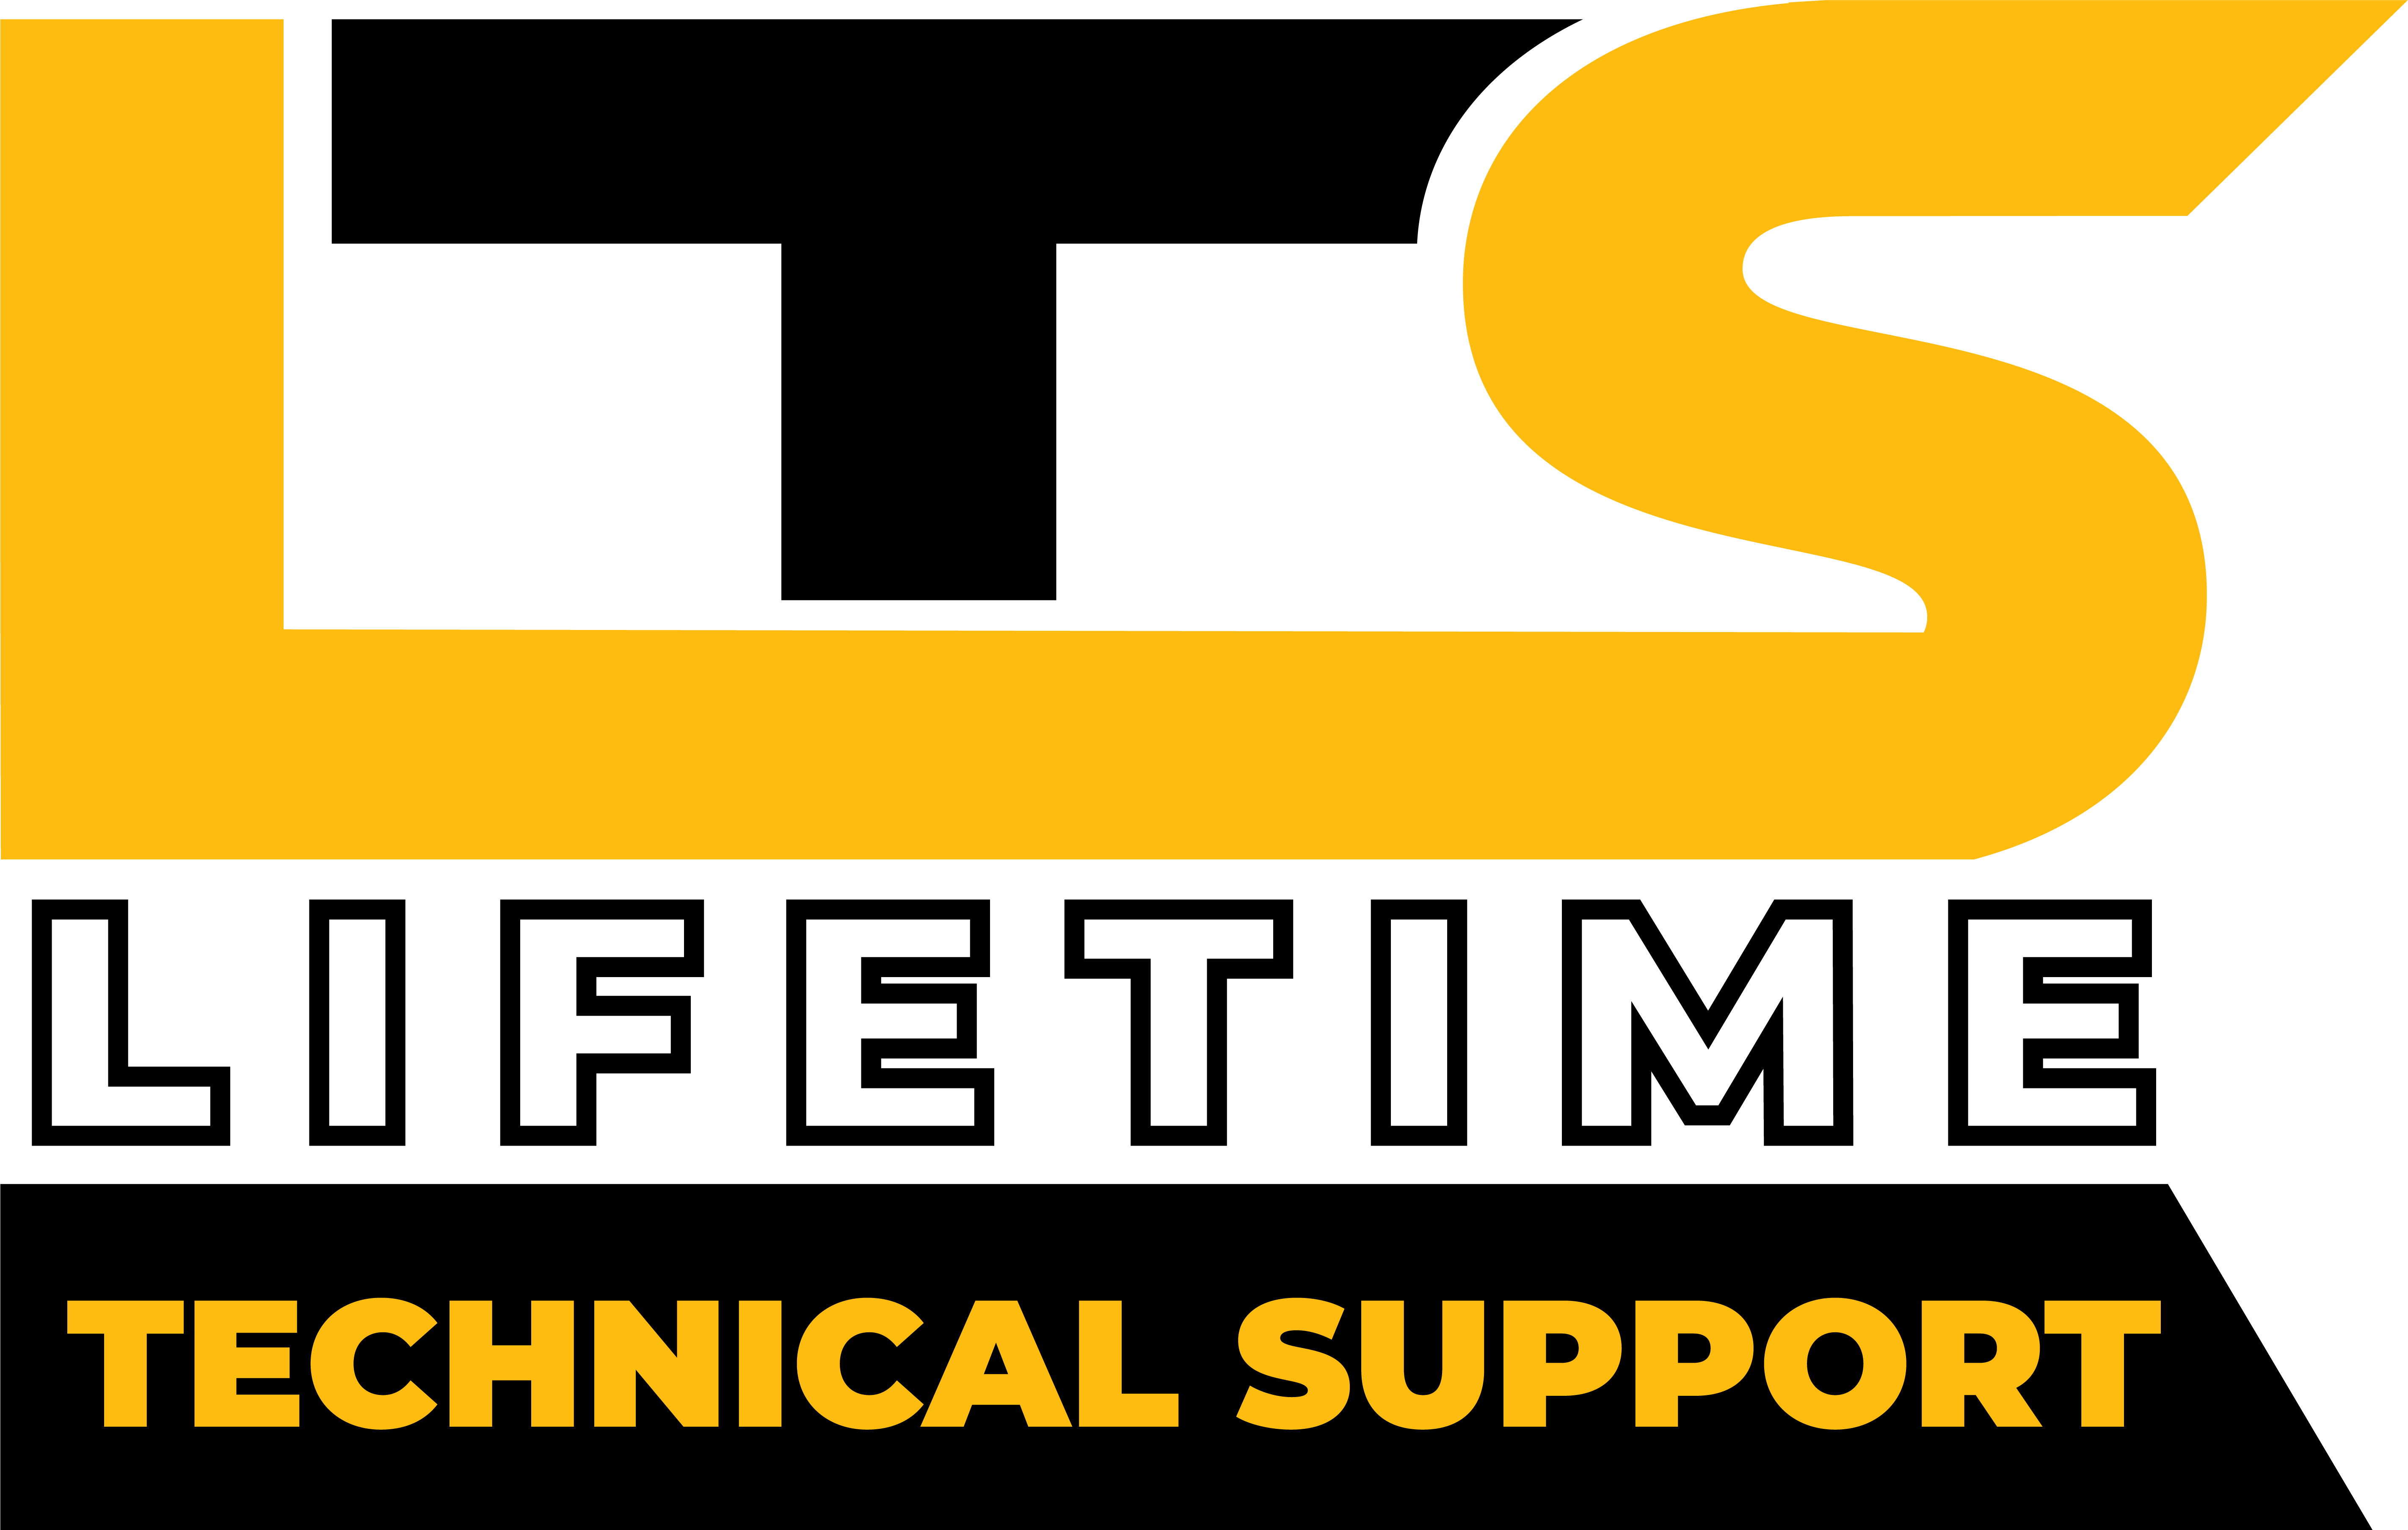 Lifetime Technical Support LTS